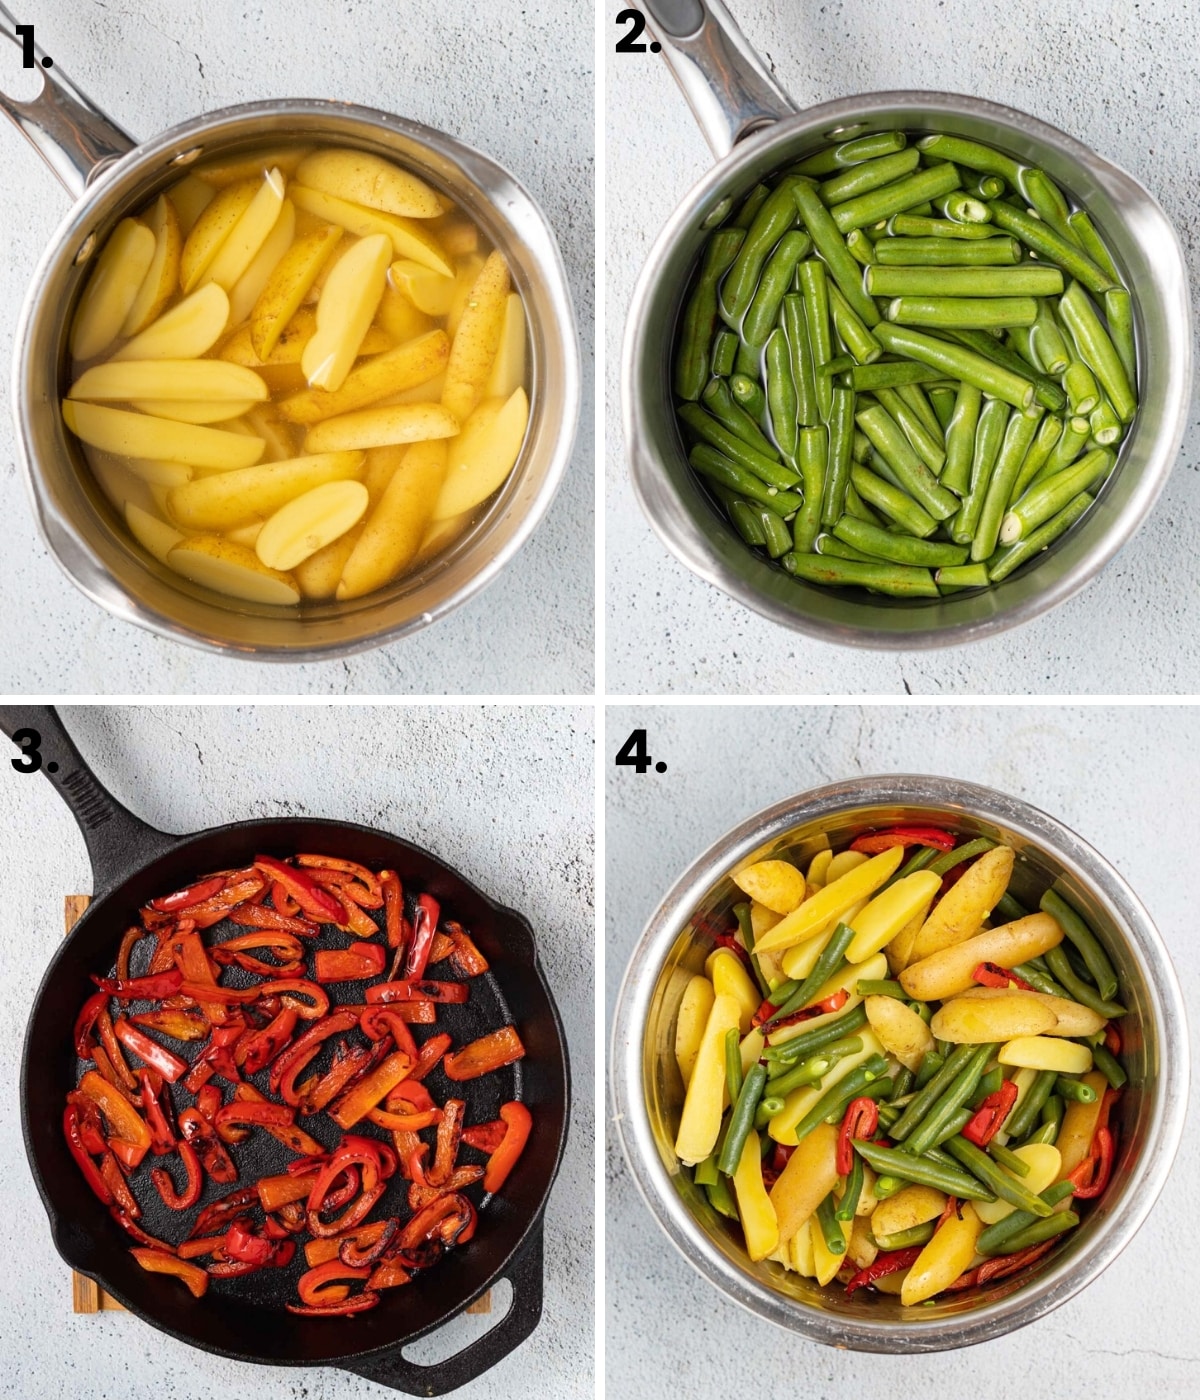 4 images: potatoes in a pan of water, green beans in a pan of water, red bell pepper slices charring in a pan, then all of them mixed up in a stainless steel bowl. 